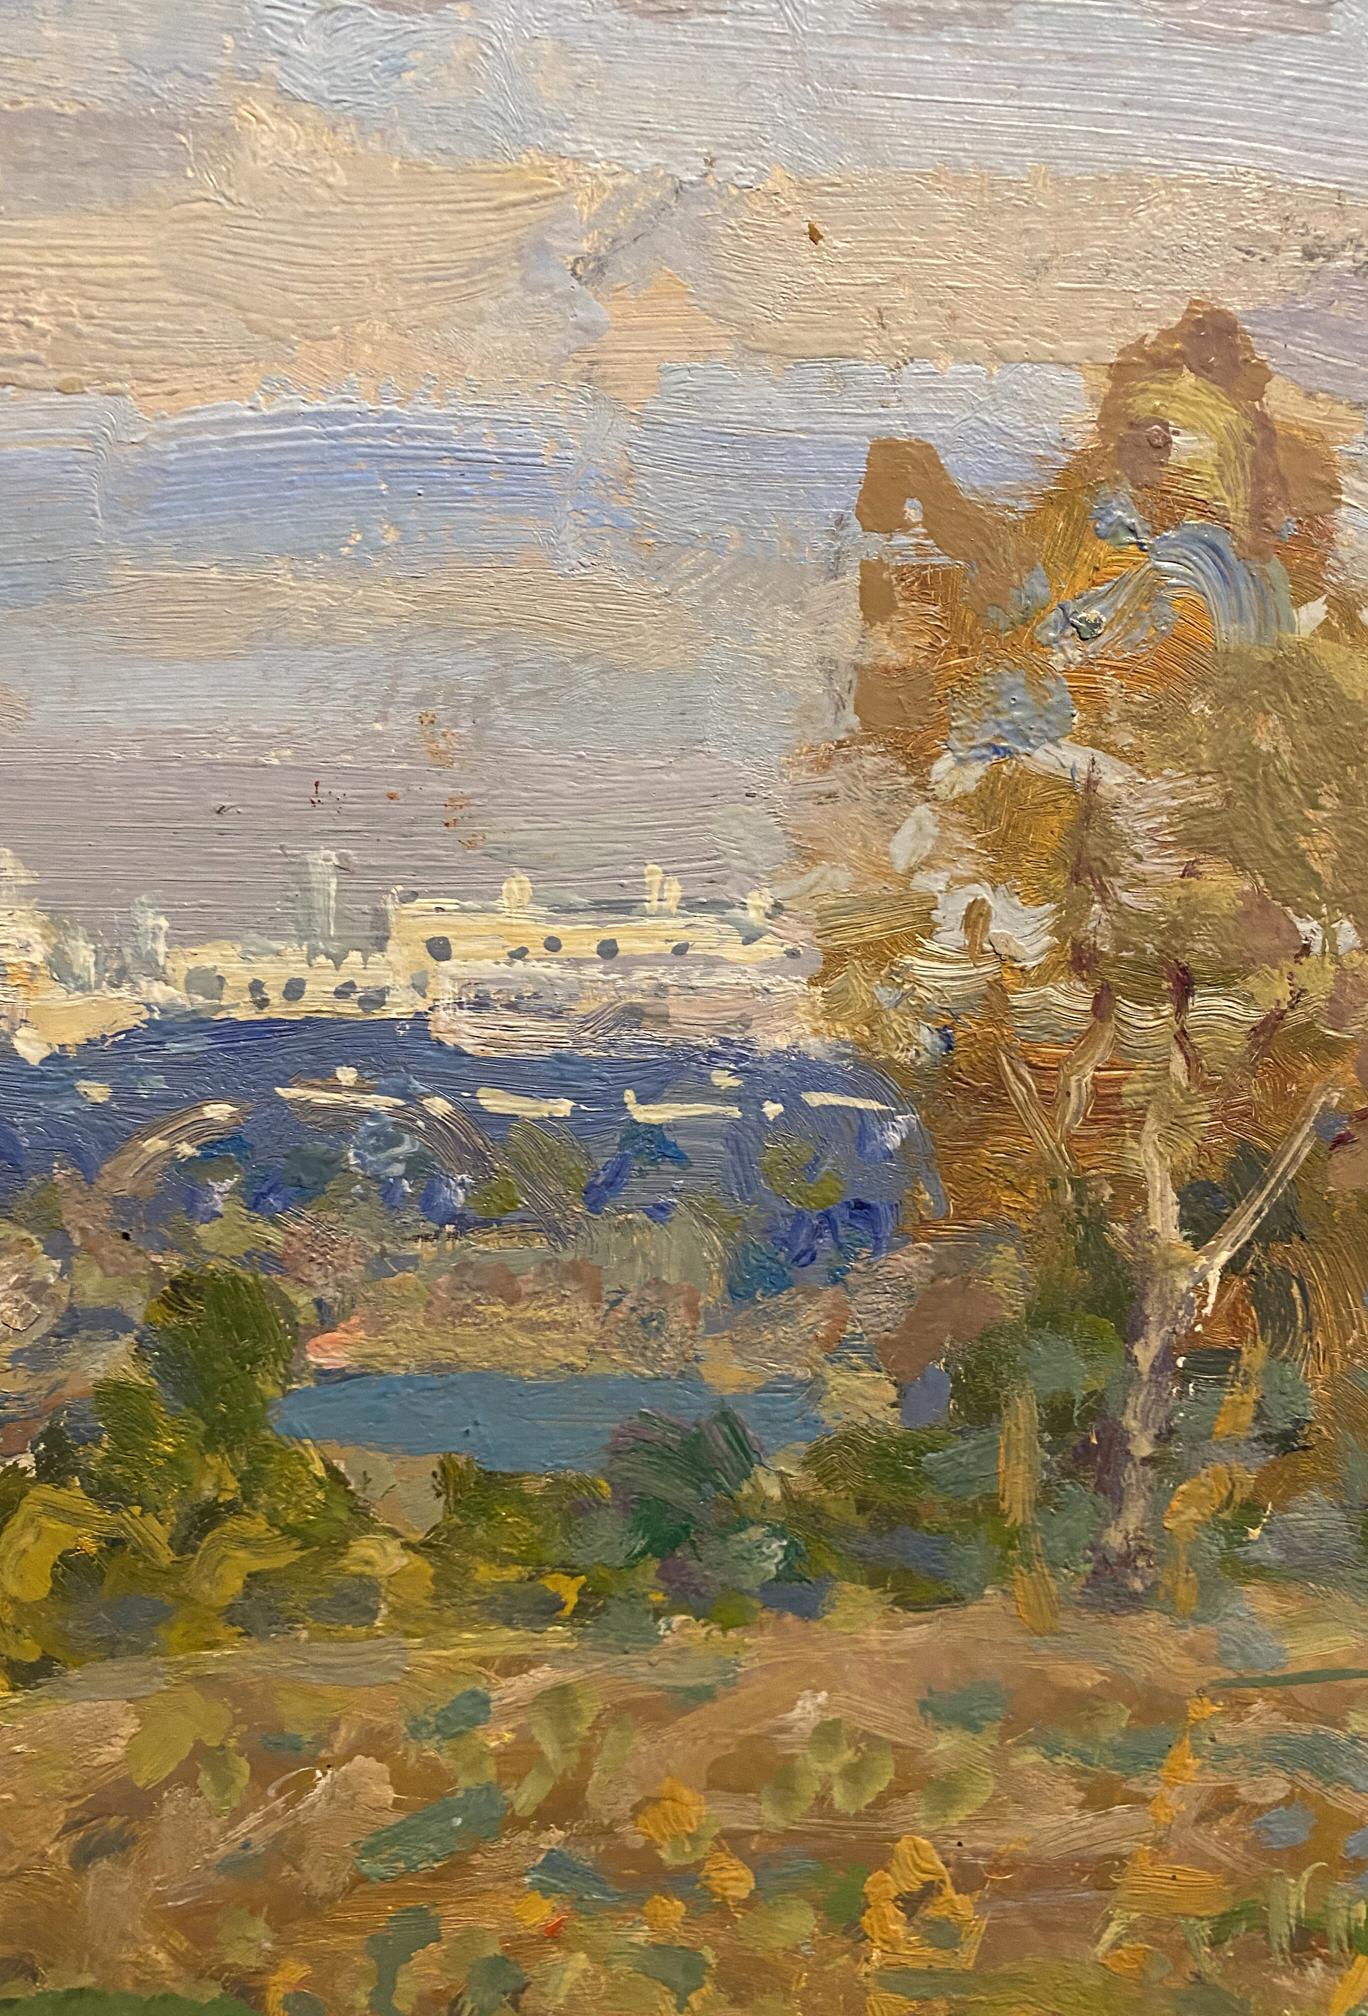 Oil painting City in the distance Georgy Kolosovsky